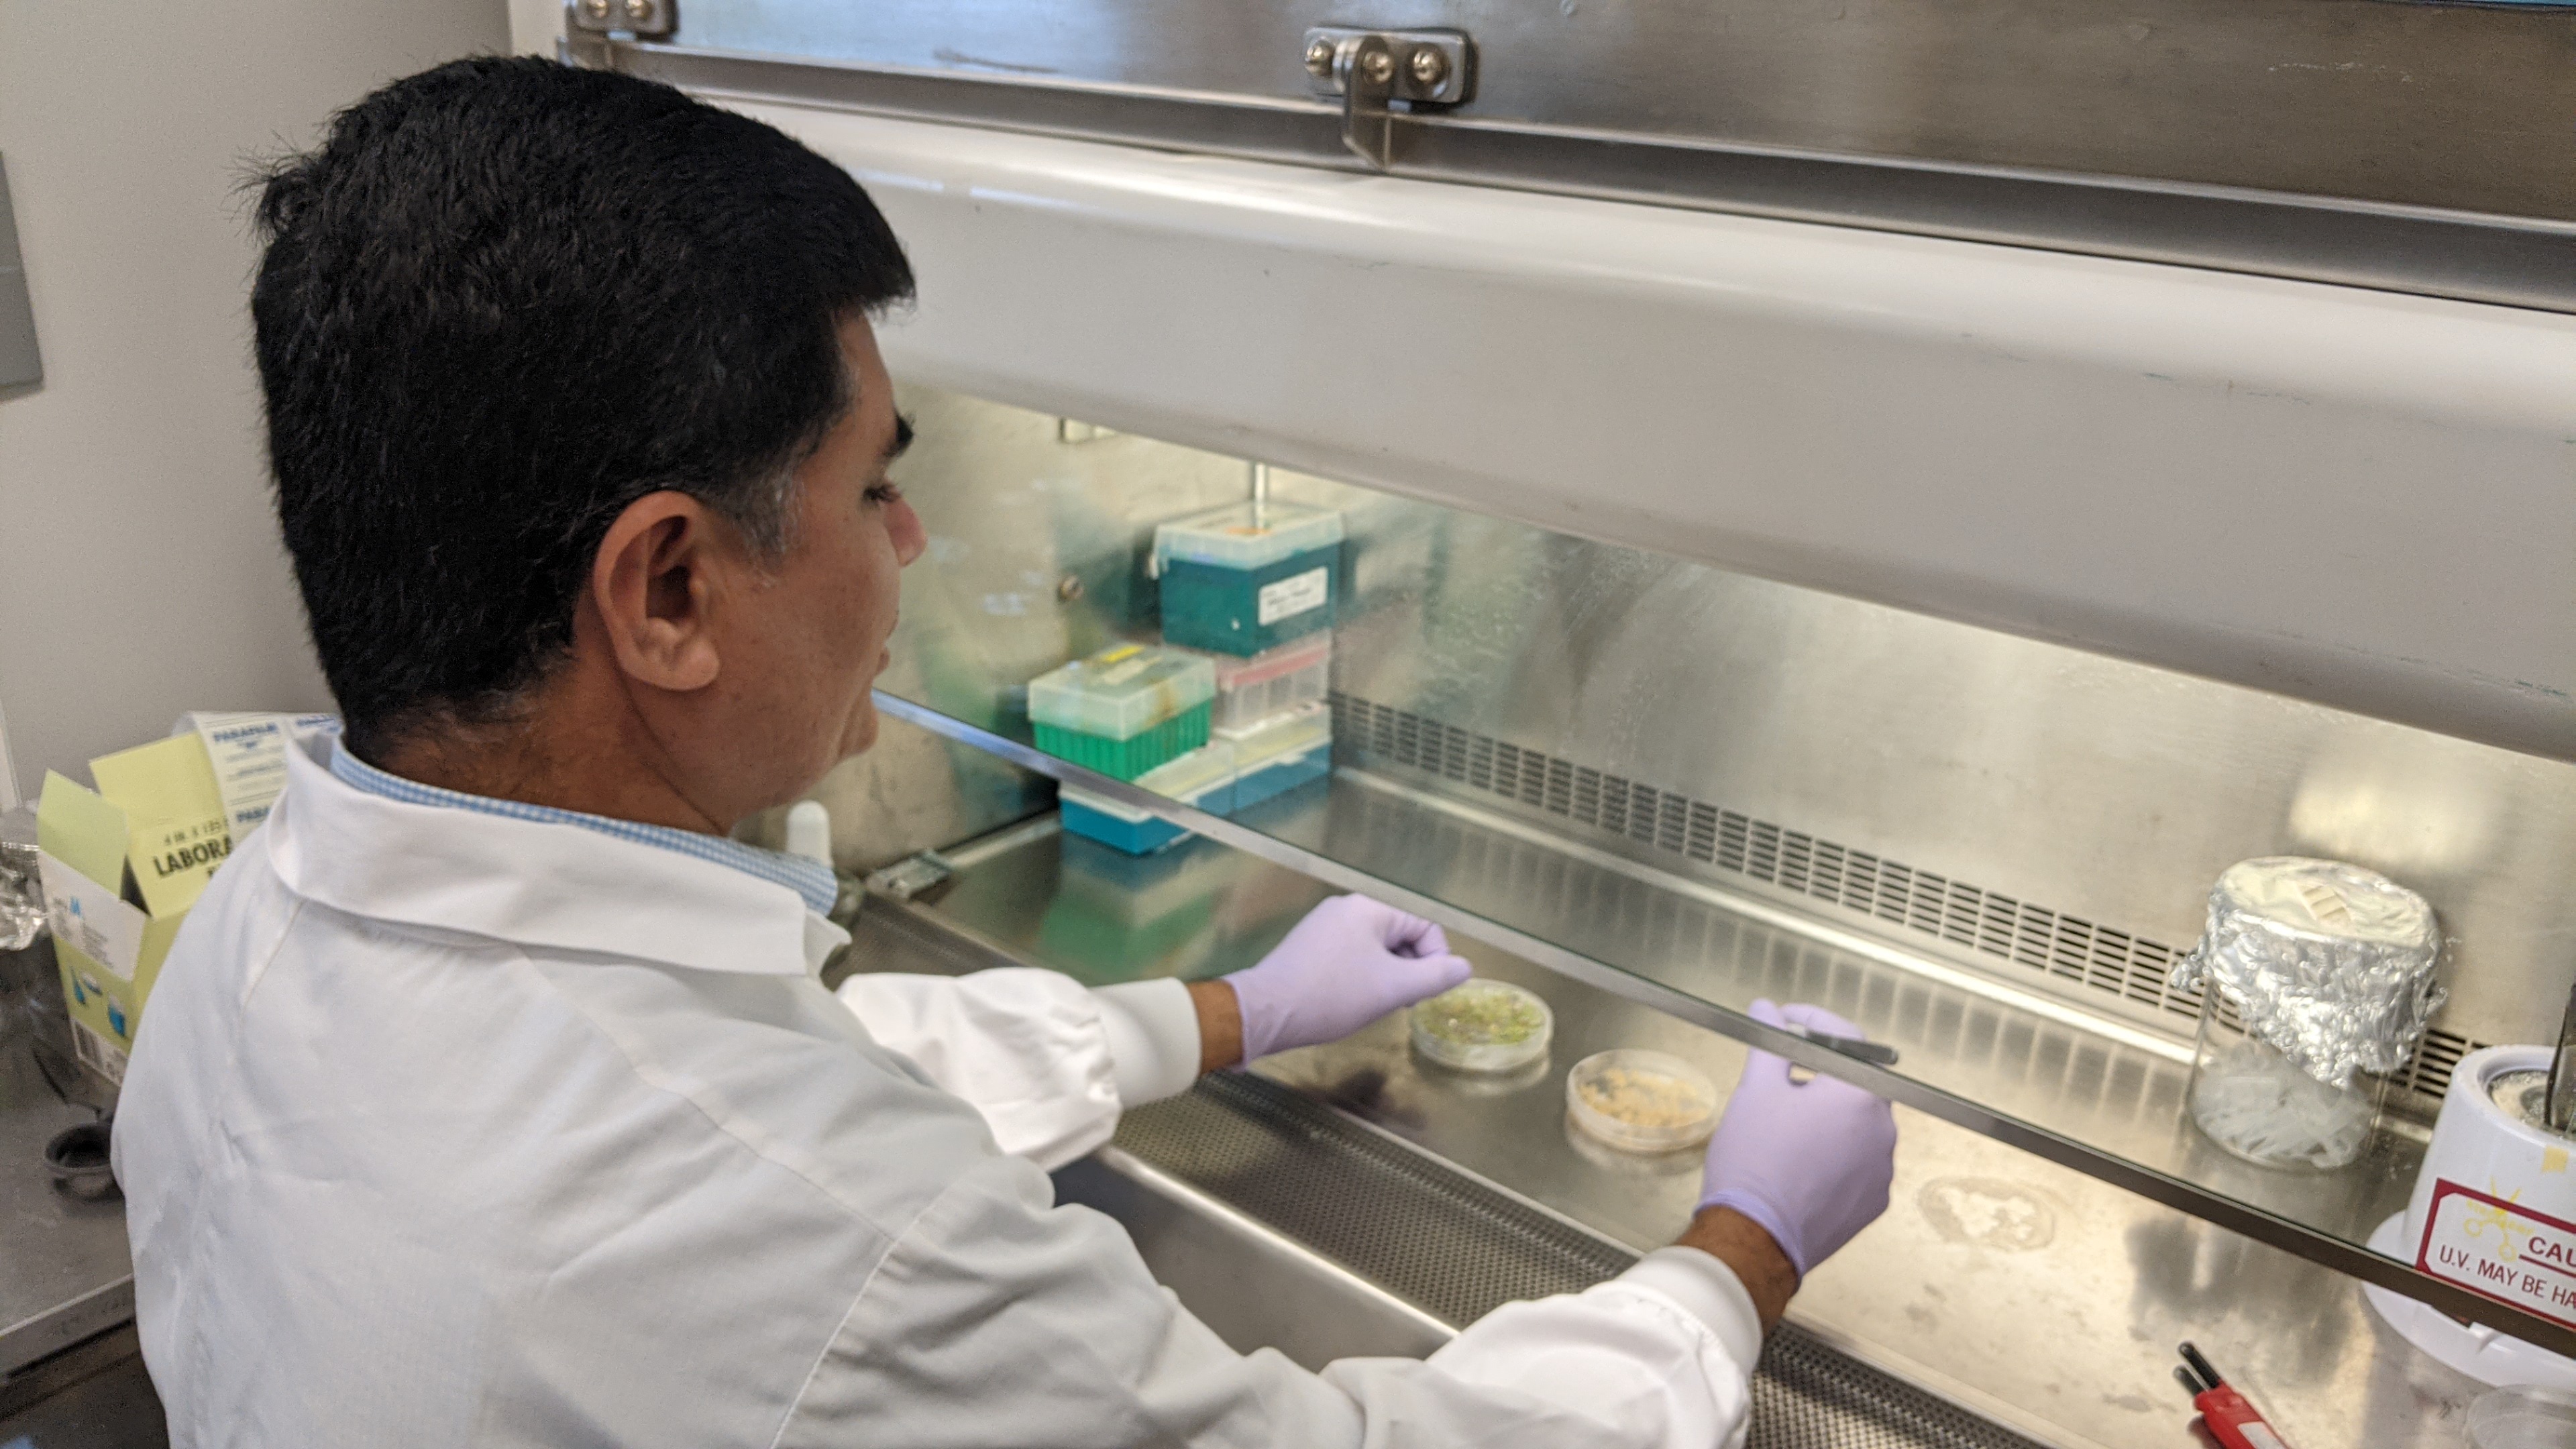 Biologist Tauqeer Ahmad sits at the laminar flow cabinet to inspect sprouting specimens. The circulating filtered air under the flow hood provides the aseptic conditions needed for successful cultivation and data gathering.